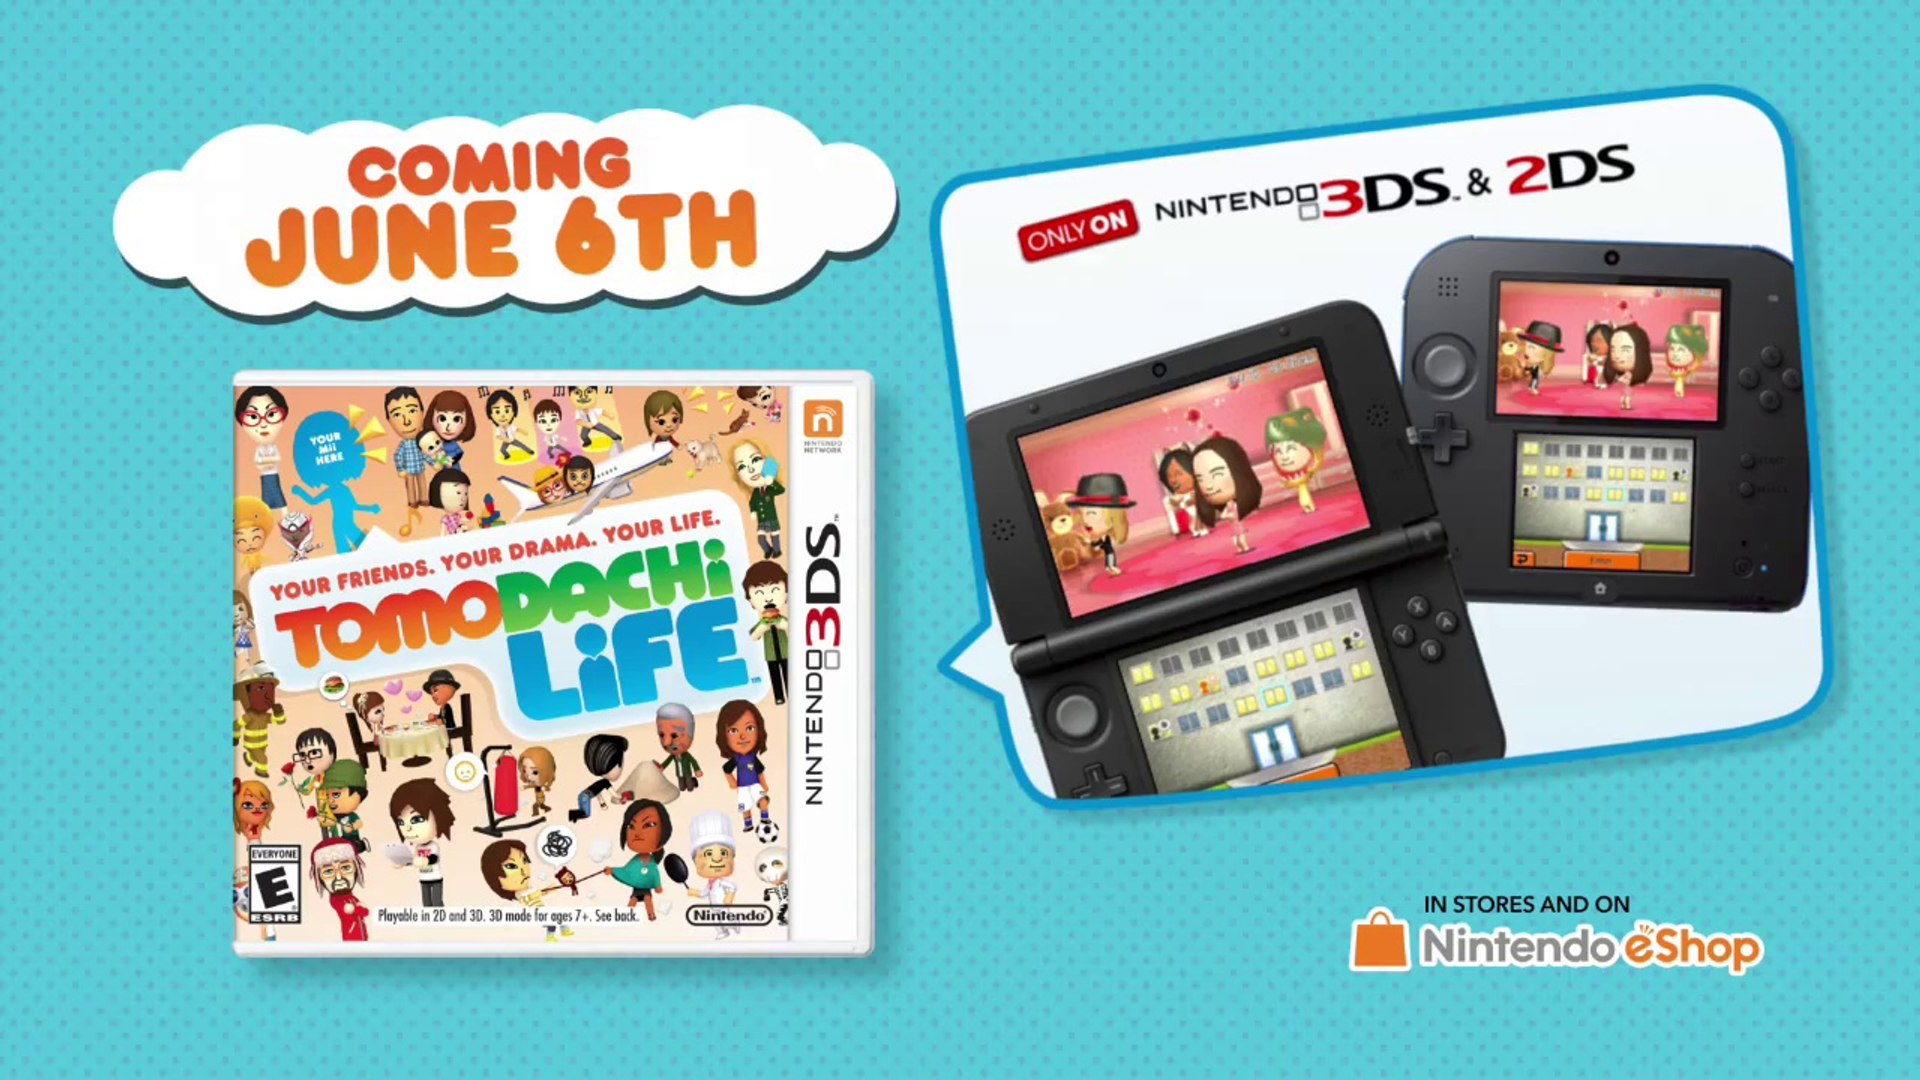 Introducing video Dailymotion - Tomodachi Life!